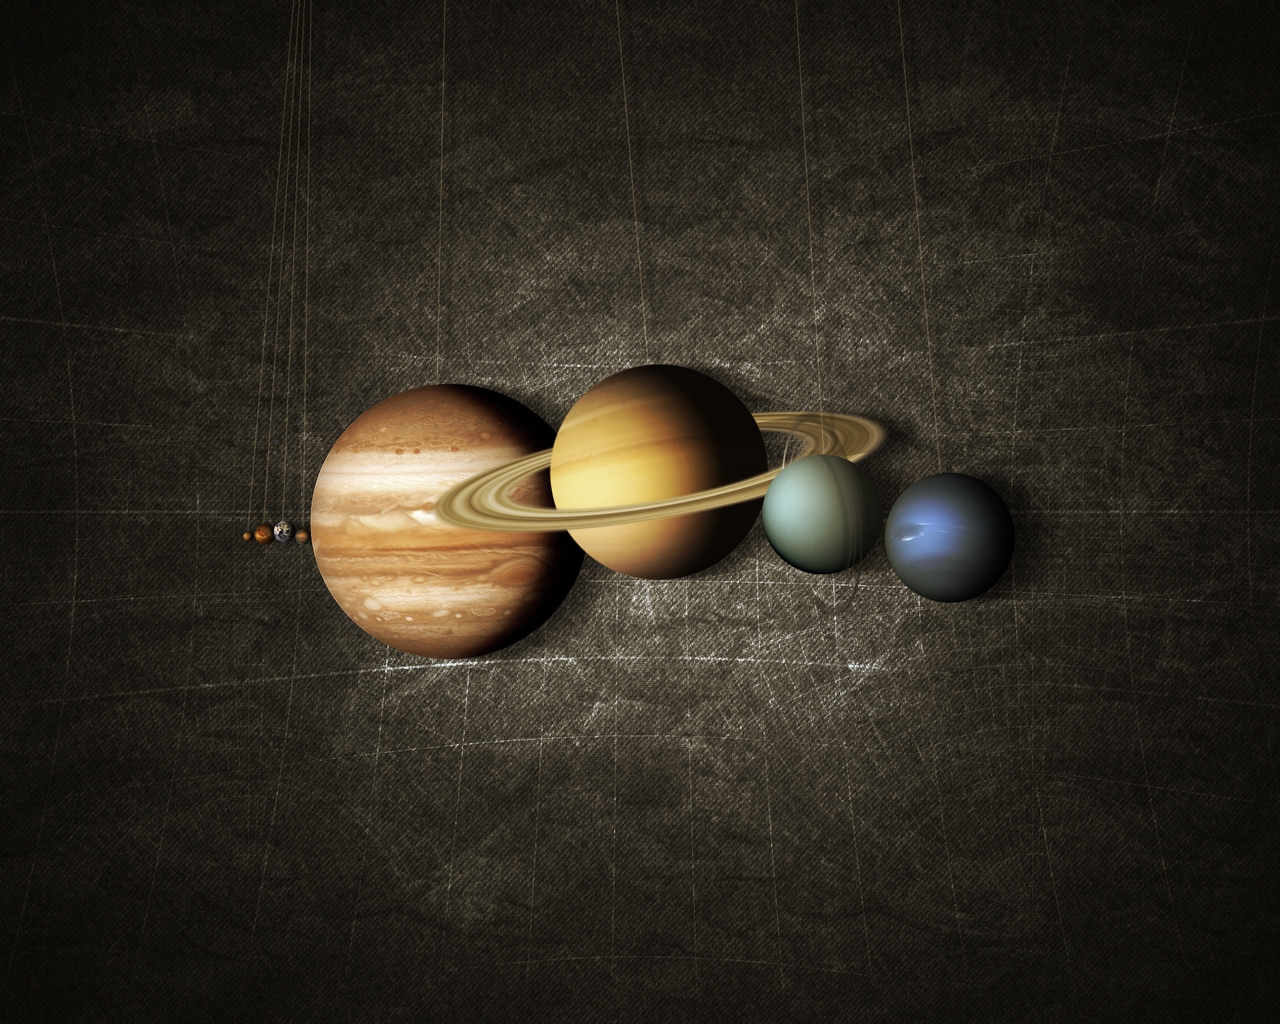 Planets Aligned for 1280 x 1024 resolution